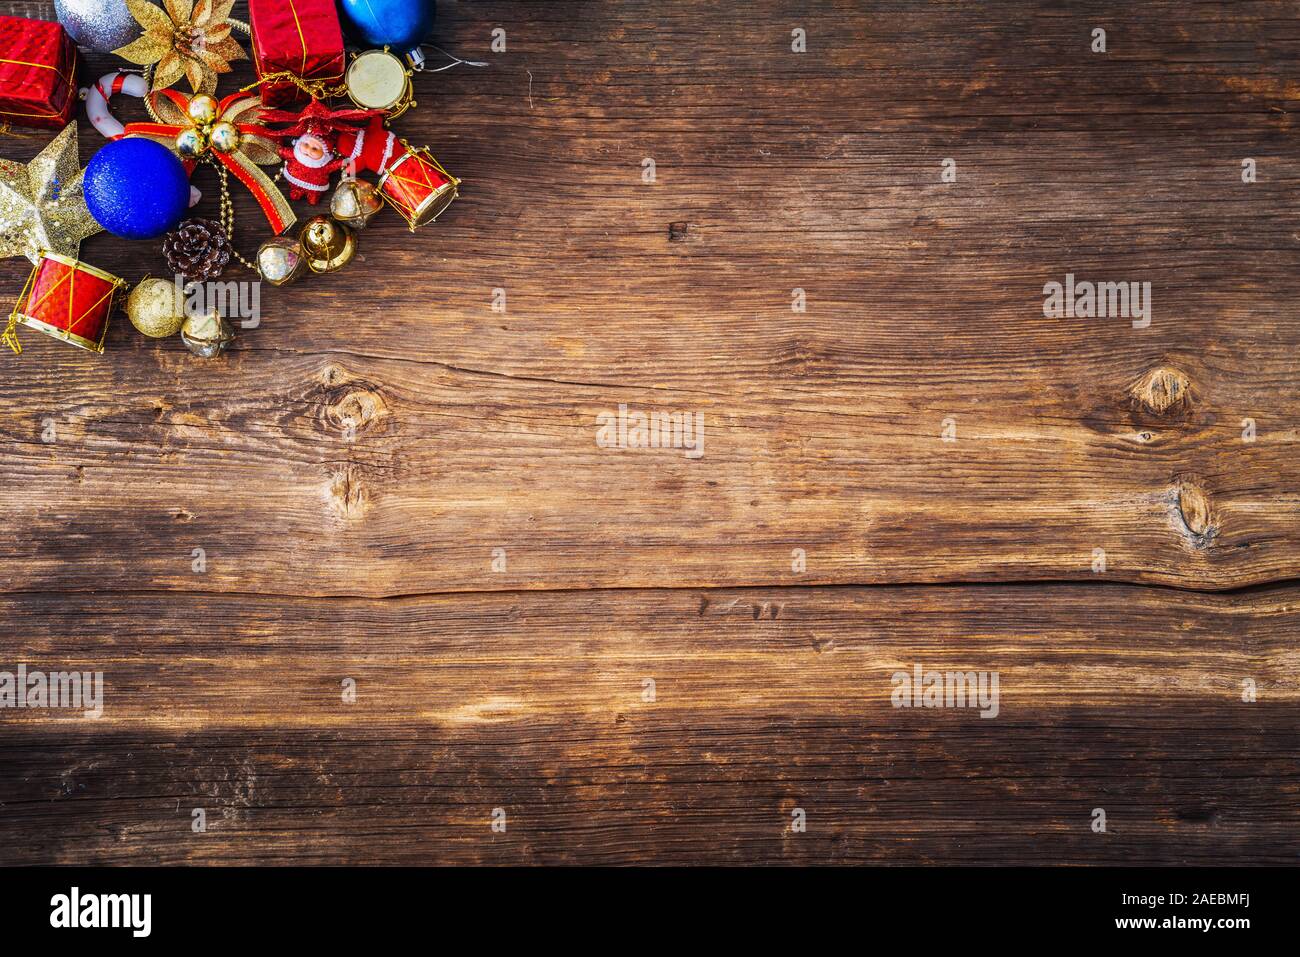 Christmas ornaments concept with wooden background. New year concept. Stock Photo